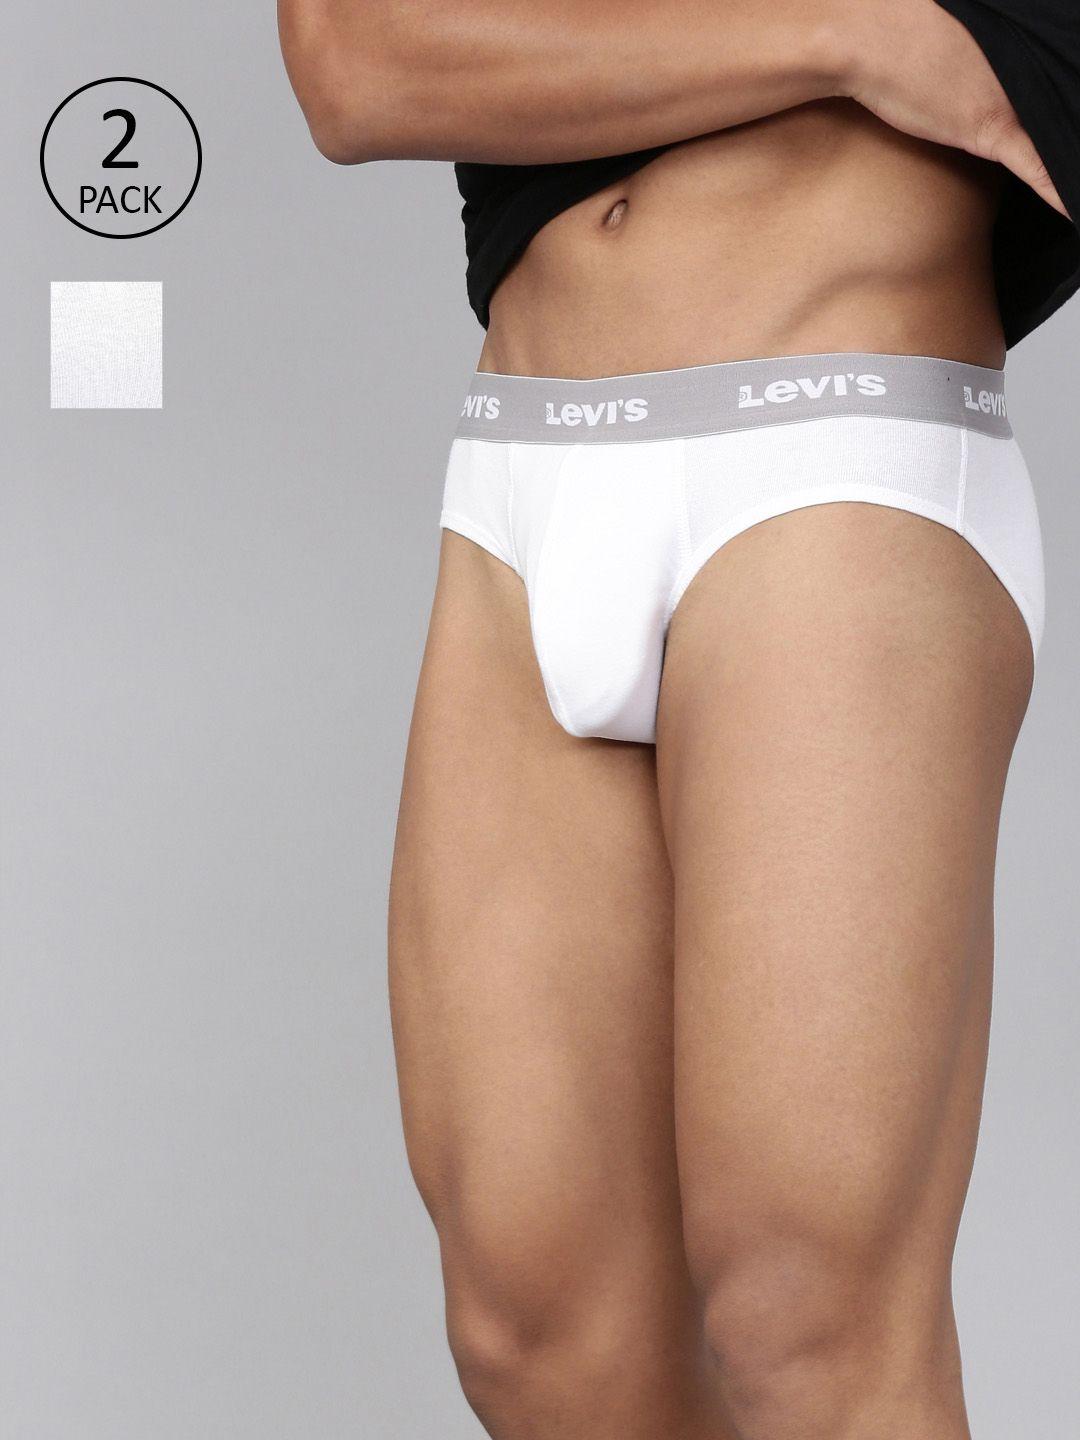 levis-men-pack-of-2-smartskin-technology-cotton-briefs-with-tag-free-comfort-#002